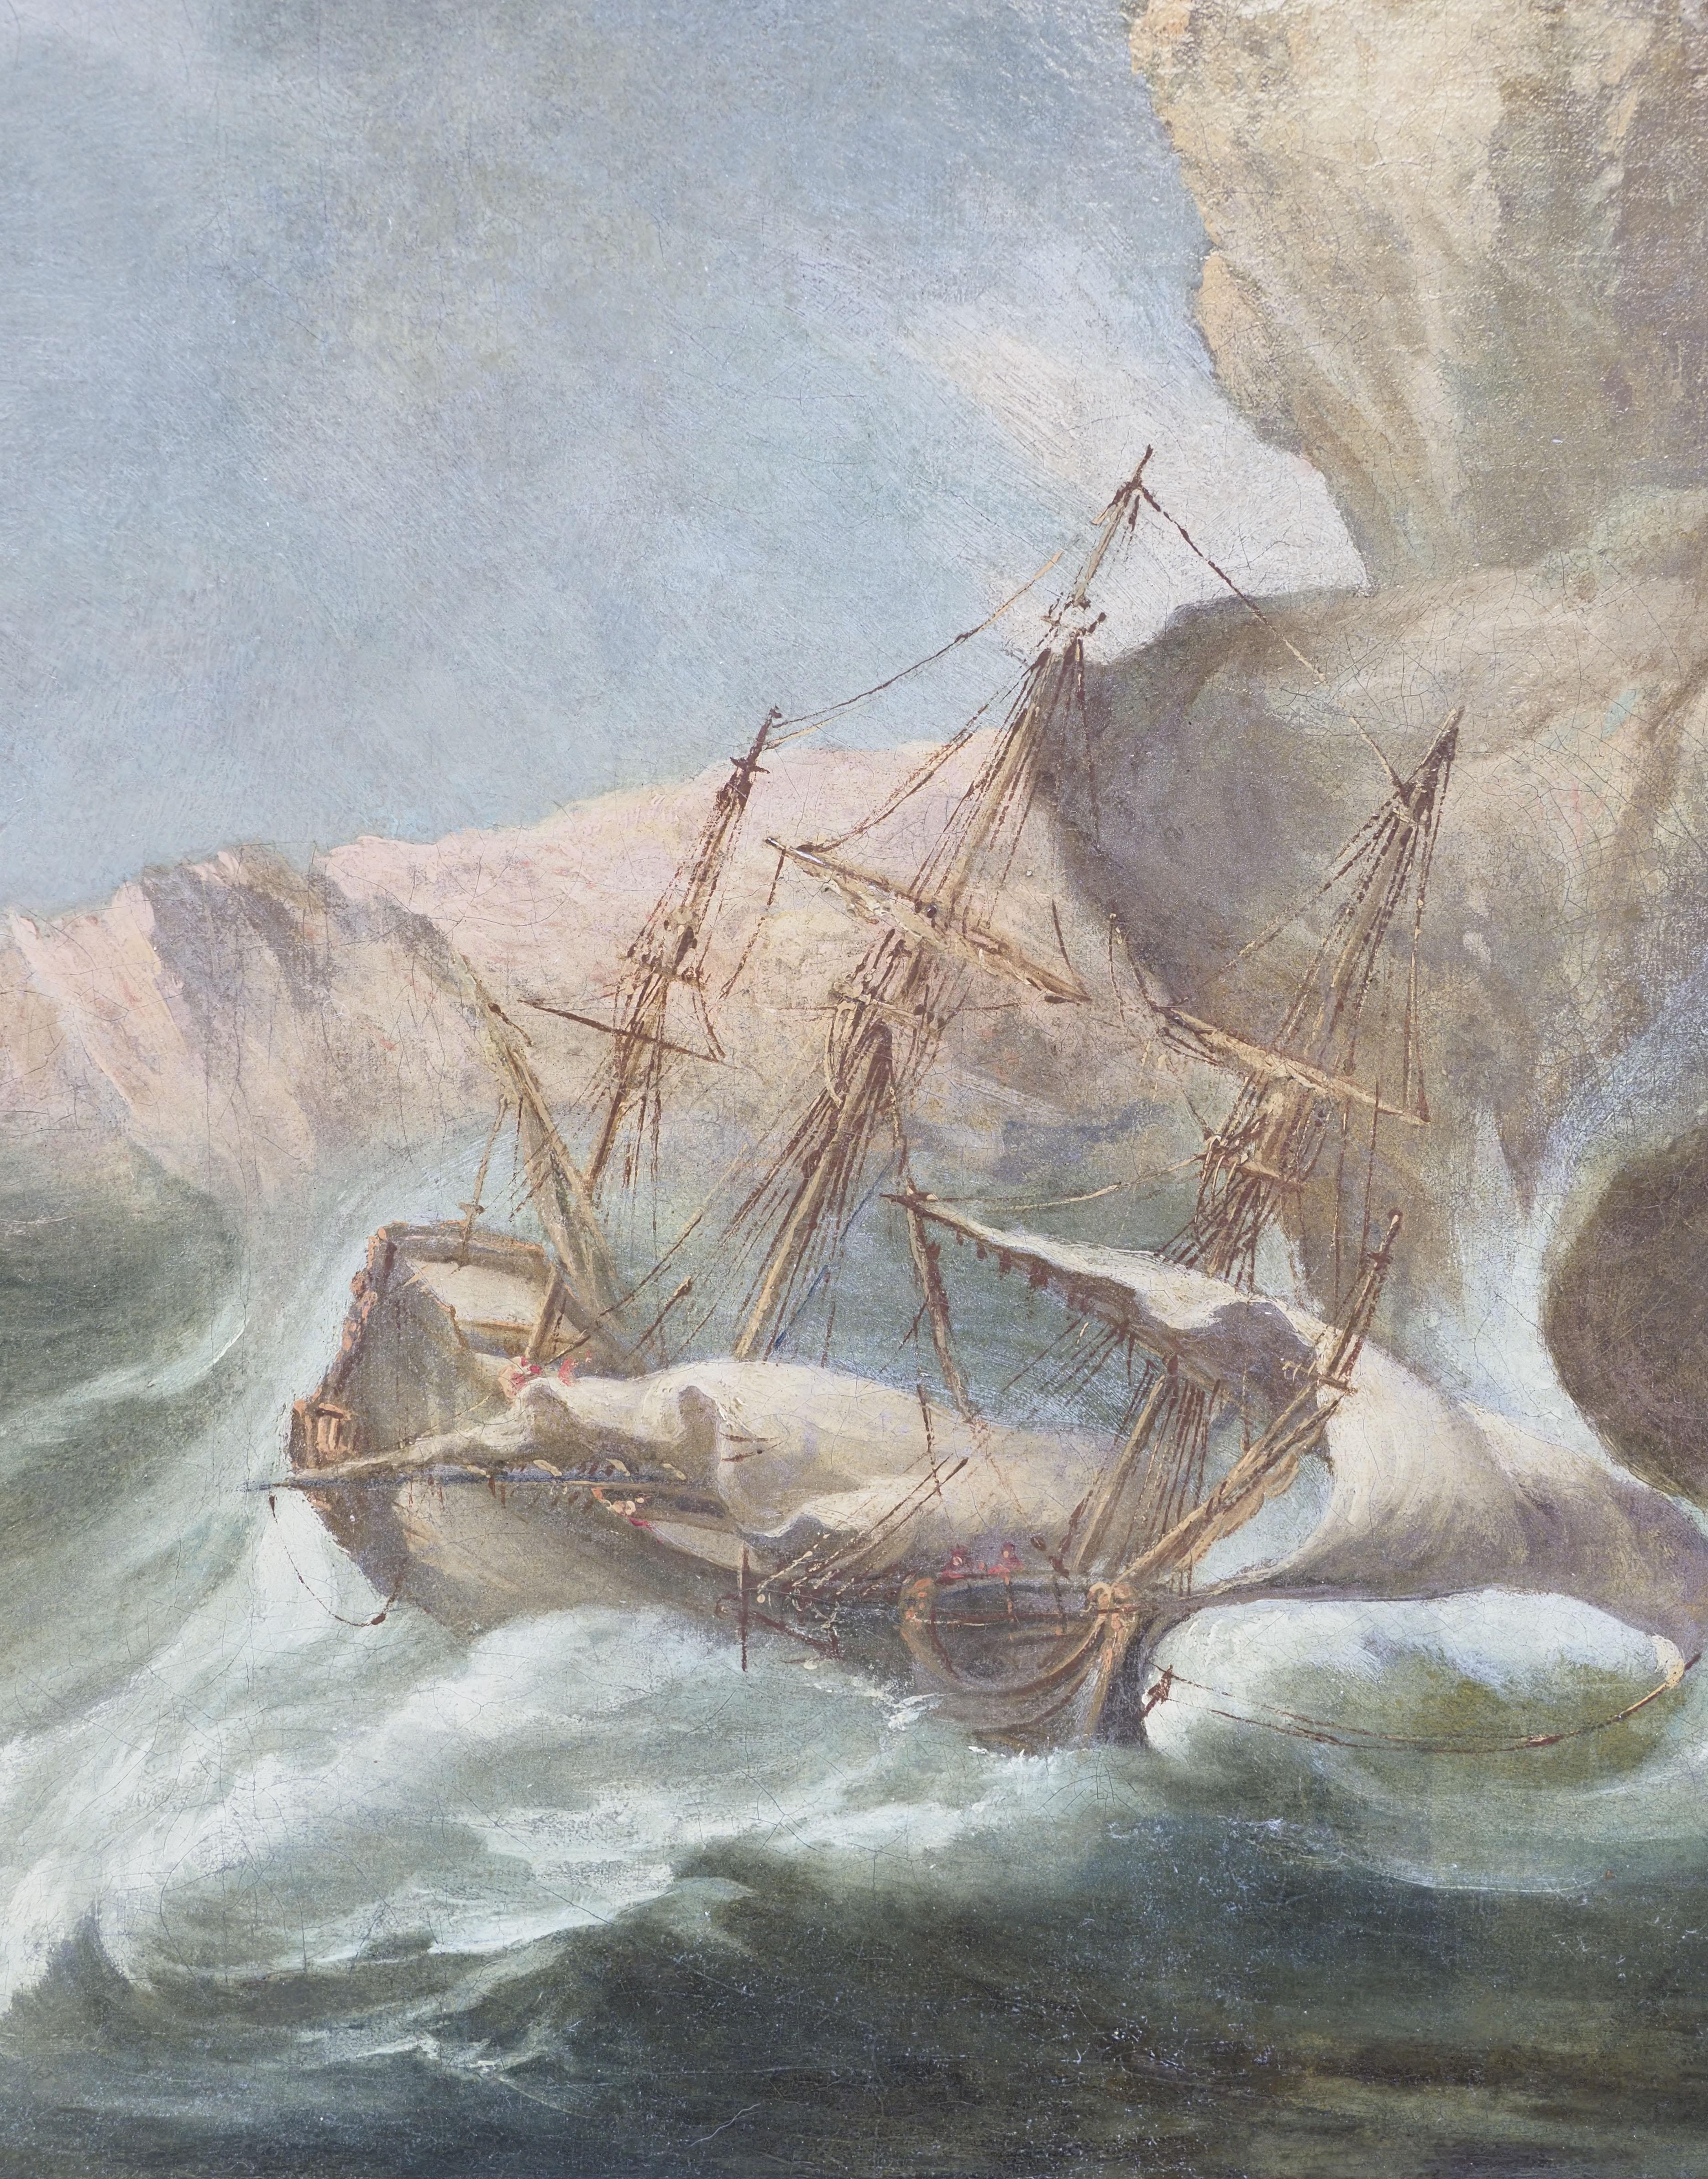 Marine scene painting by Flemish artist early XIX century
Created by a Flemish artist in the early XIX century, this sizeable oil-on-canvas artwork portrays a scenic marine landscape.
Five merchant vessels are facing a rough stormy sea in